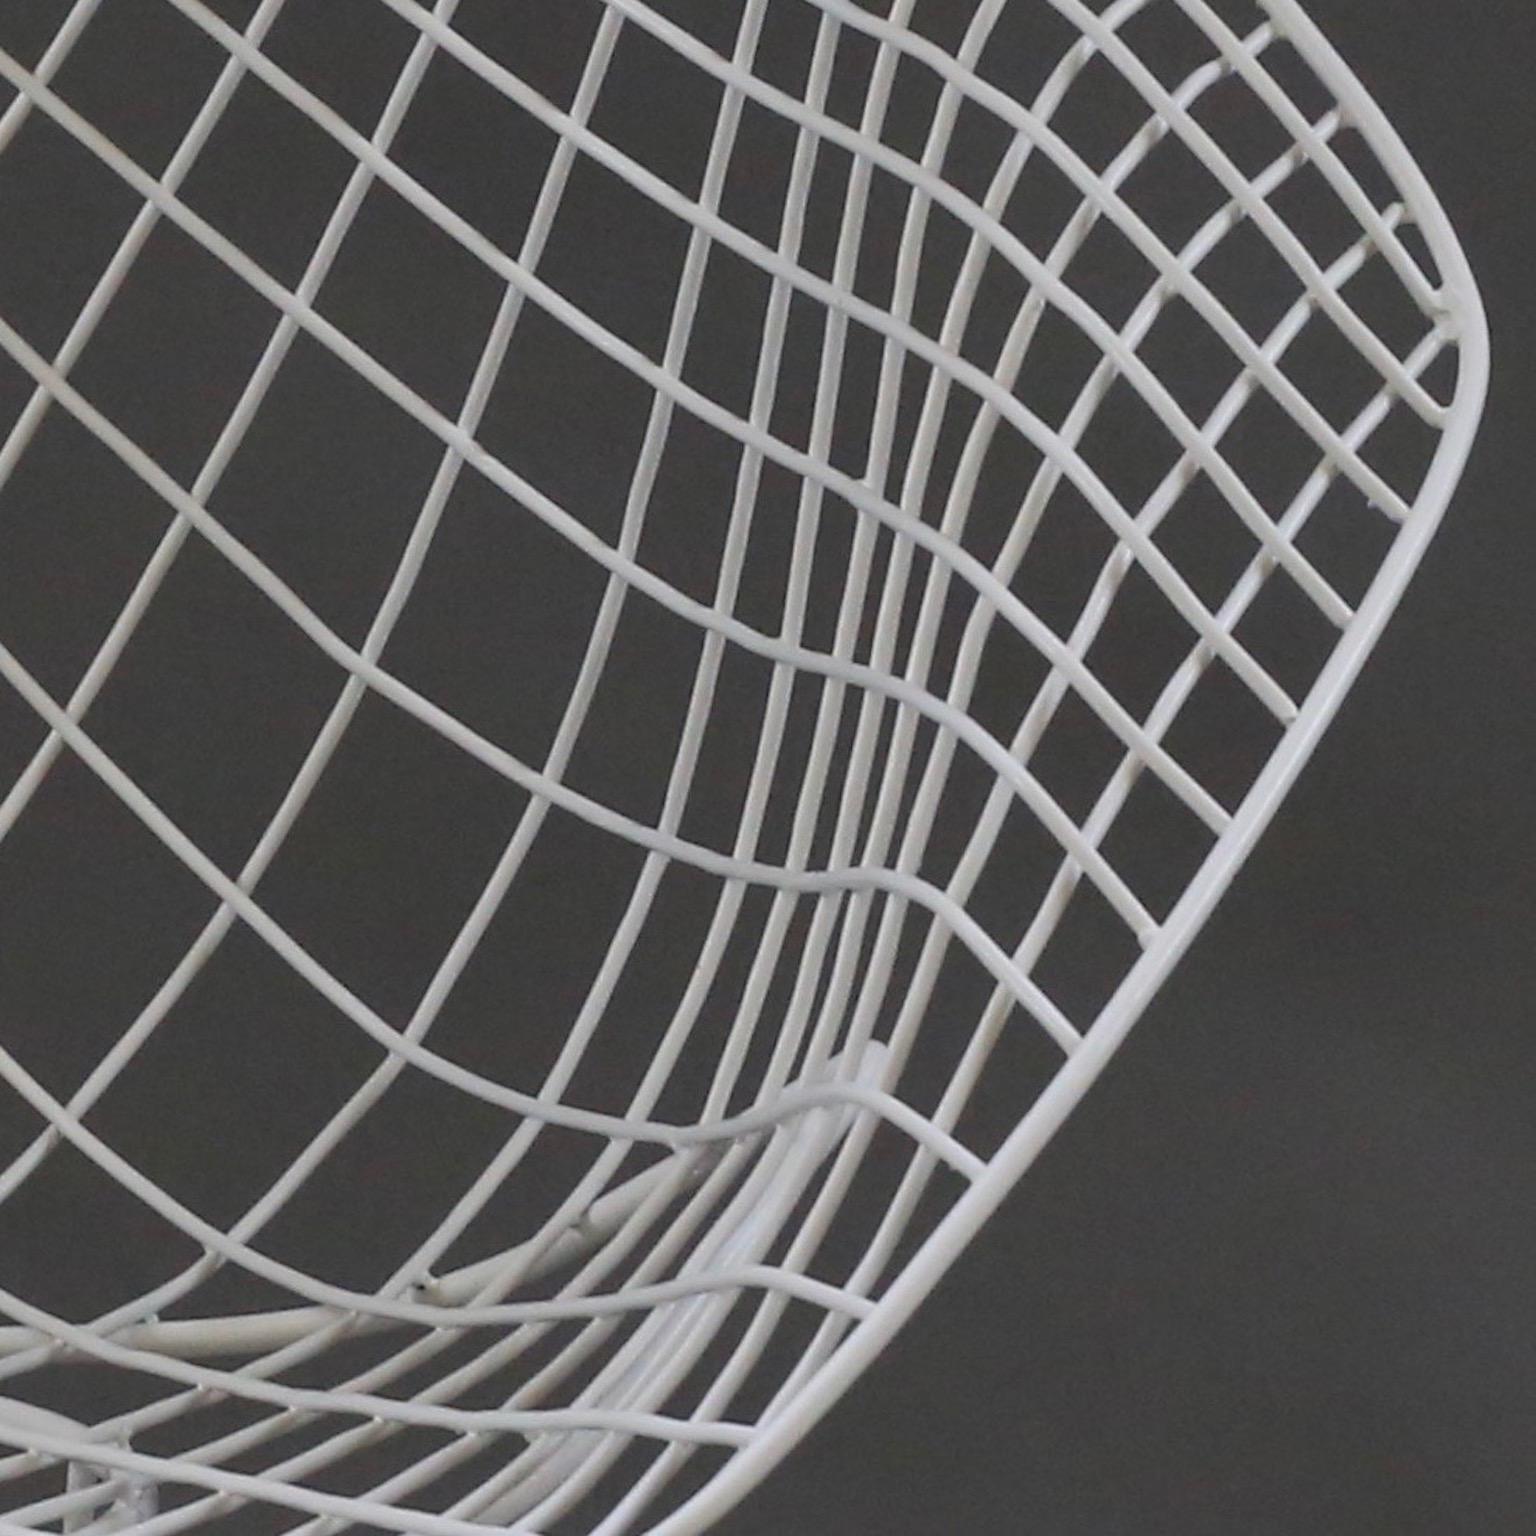 Wire Framed Harry Bertoia Indoor/Outdoor Chairs  In Good Condition For Sale In Limerick, IE